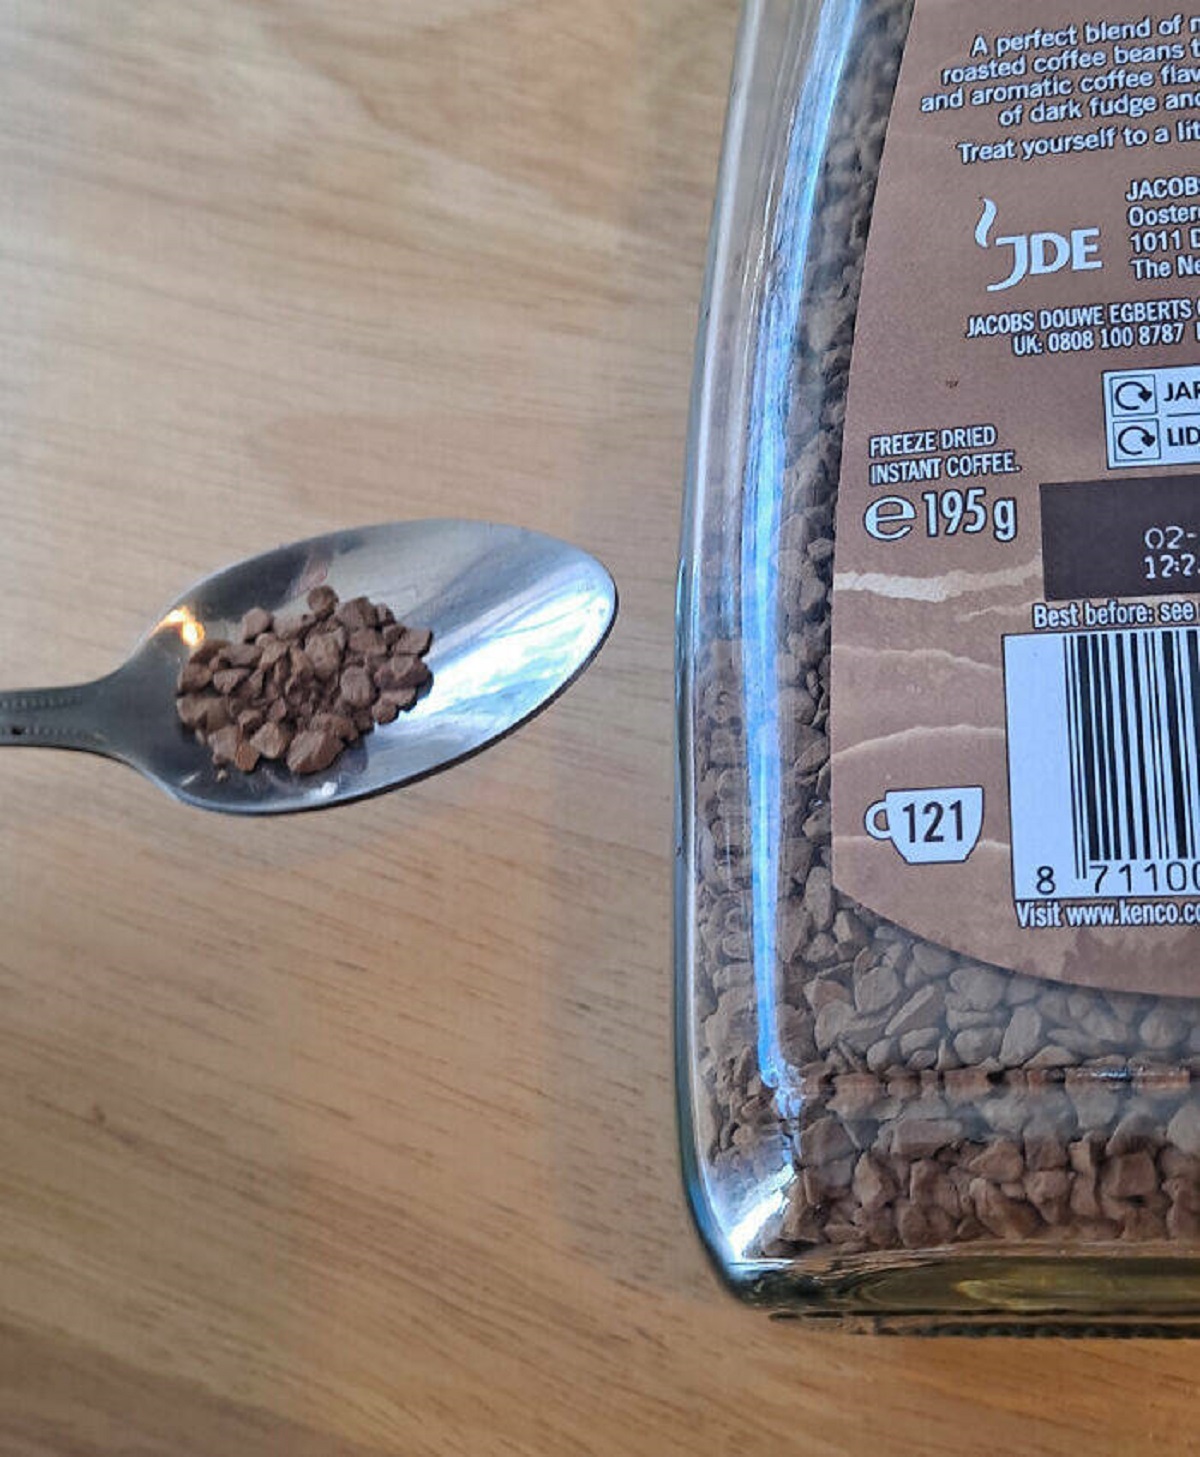 "This Jar Of Coffee Seems To Imply That 1.6g Is A Valid Serving (195g ÷ 121)"